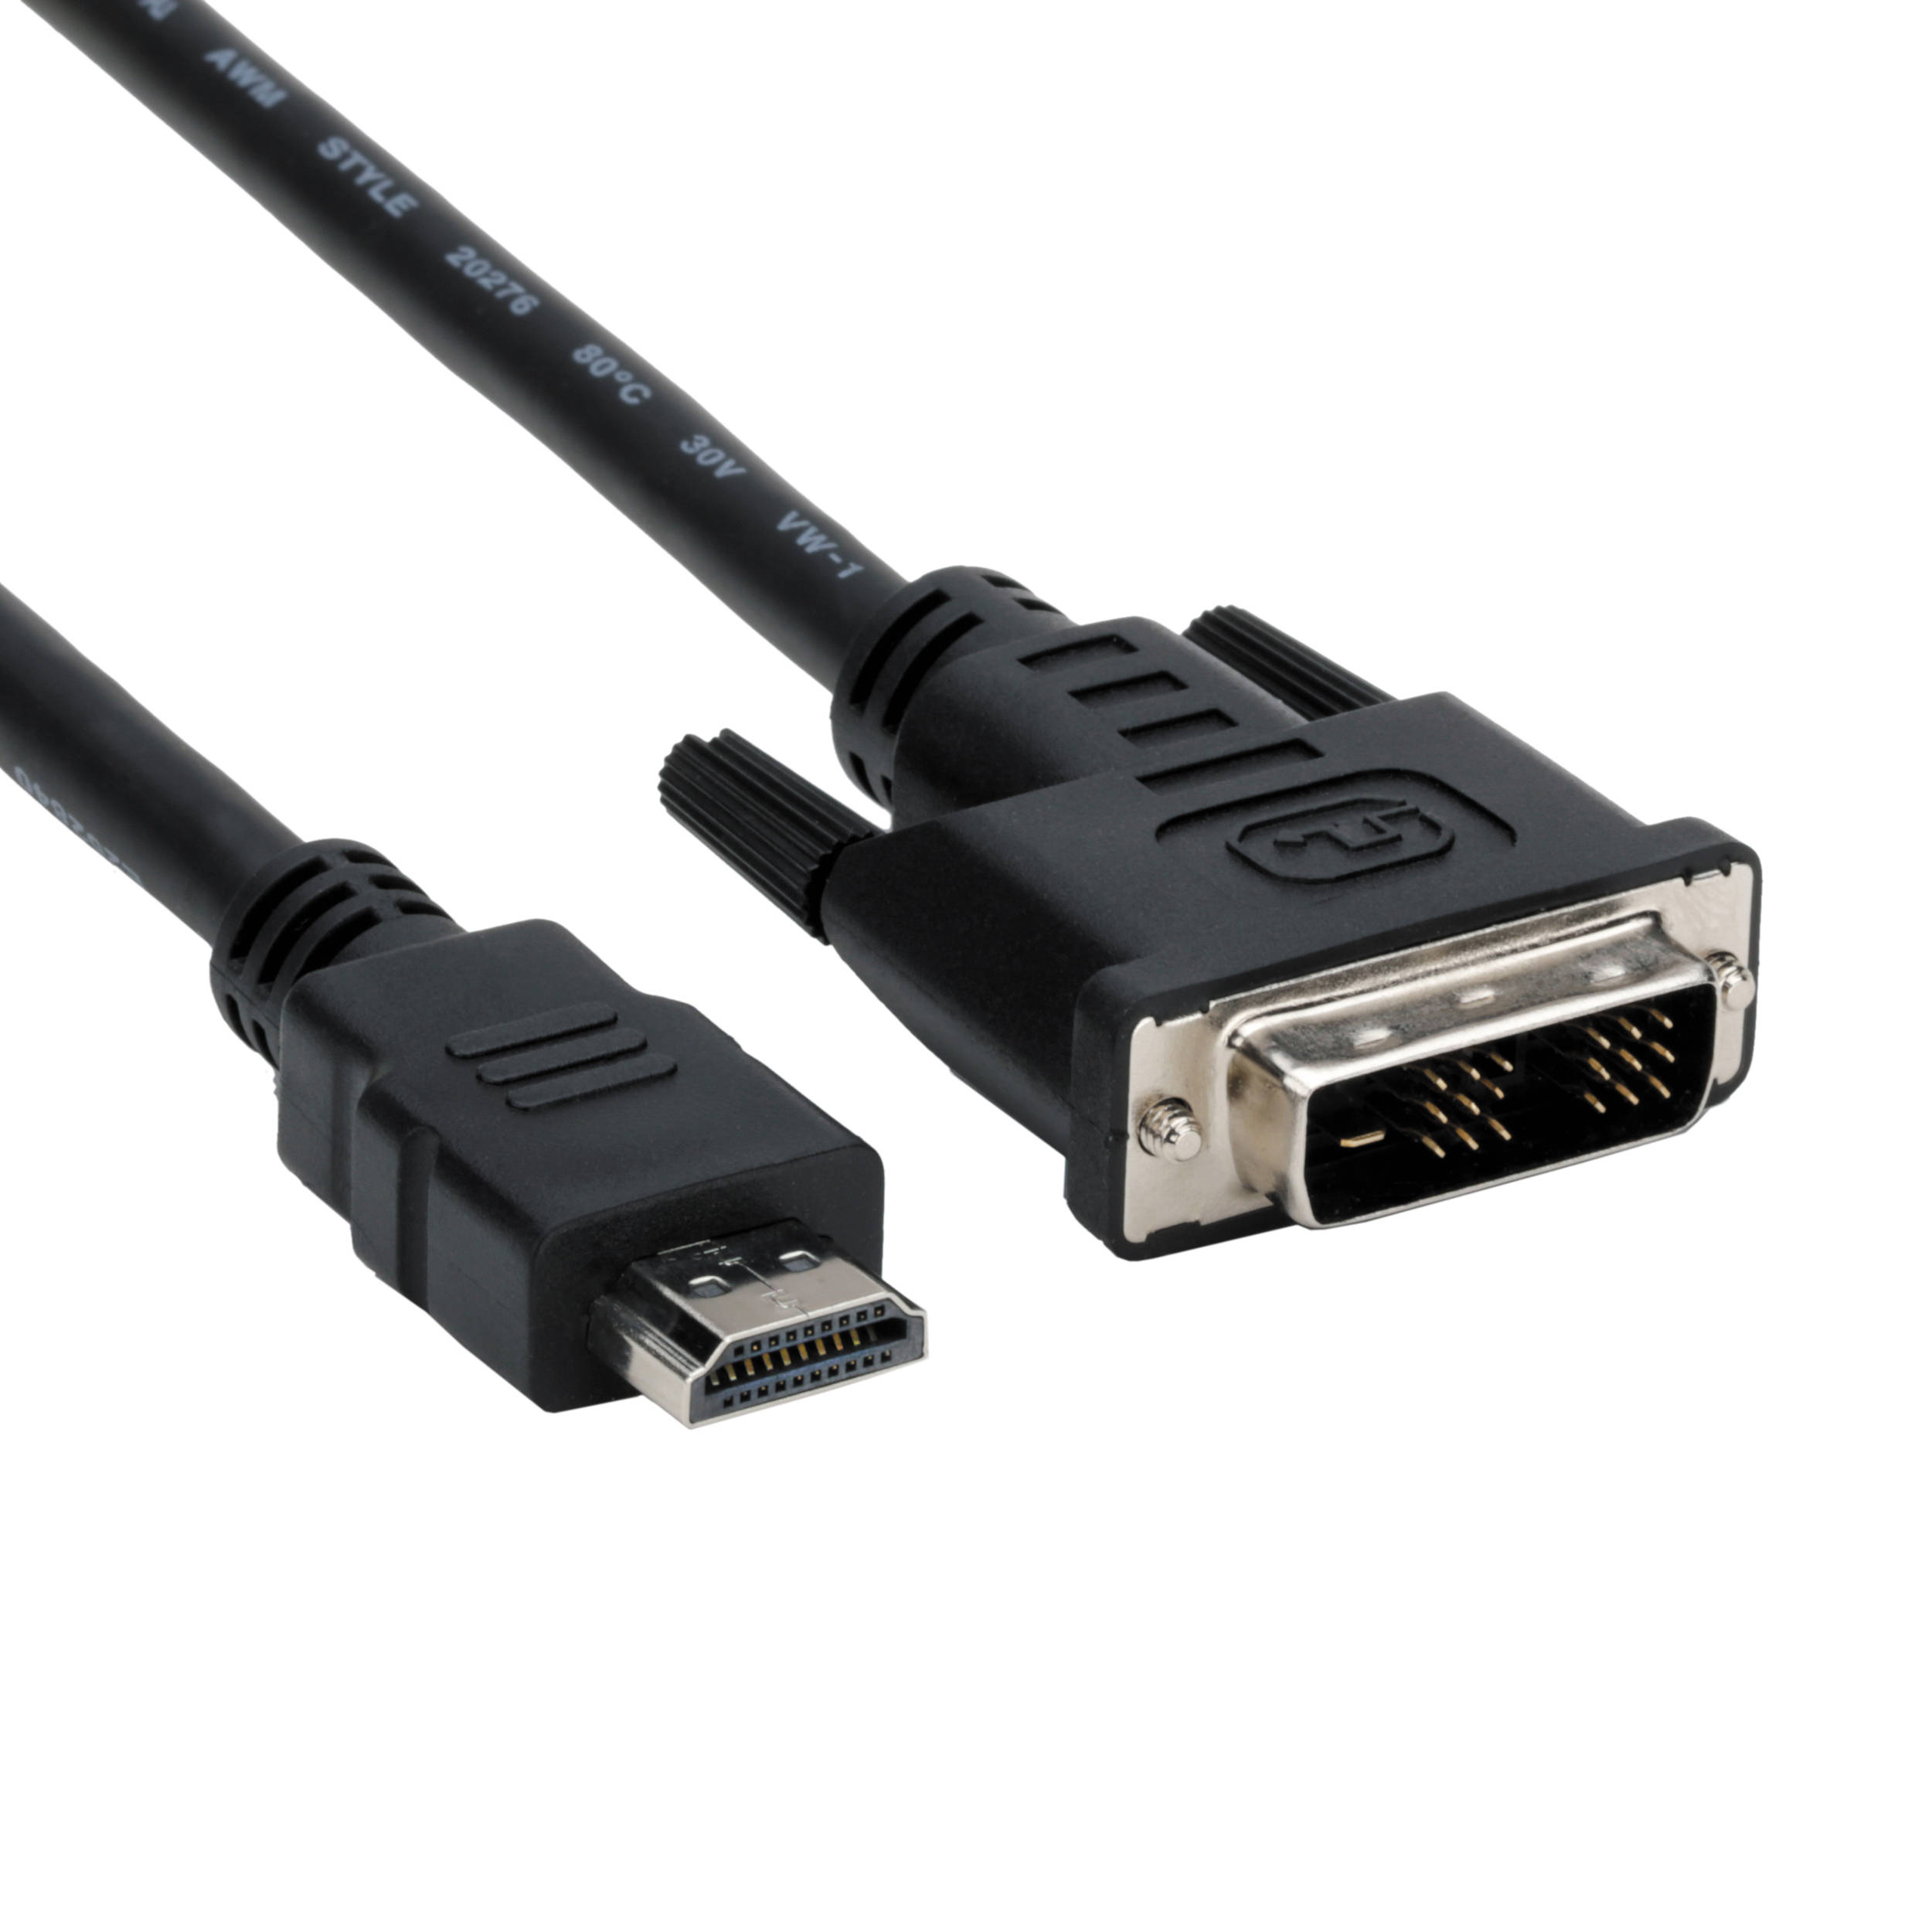 Pearstone 25' HDMI to DVI Cable HDDV-A125 B&H Photo Video